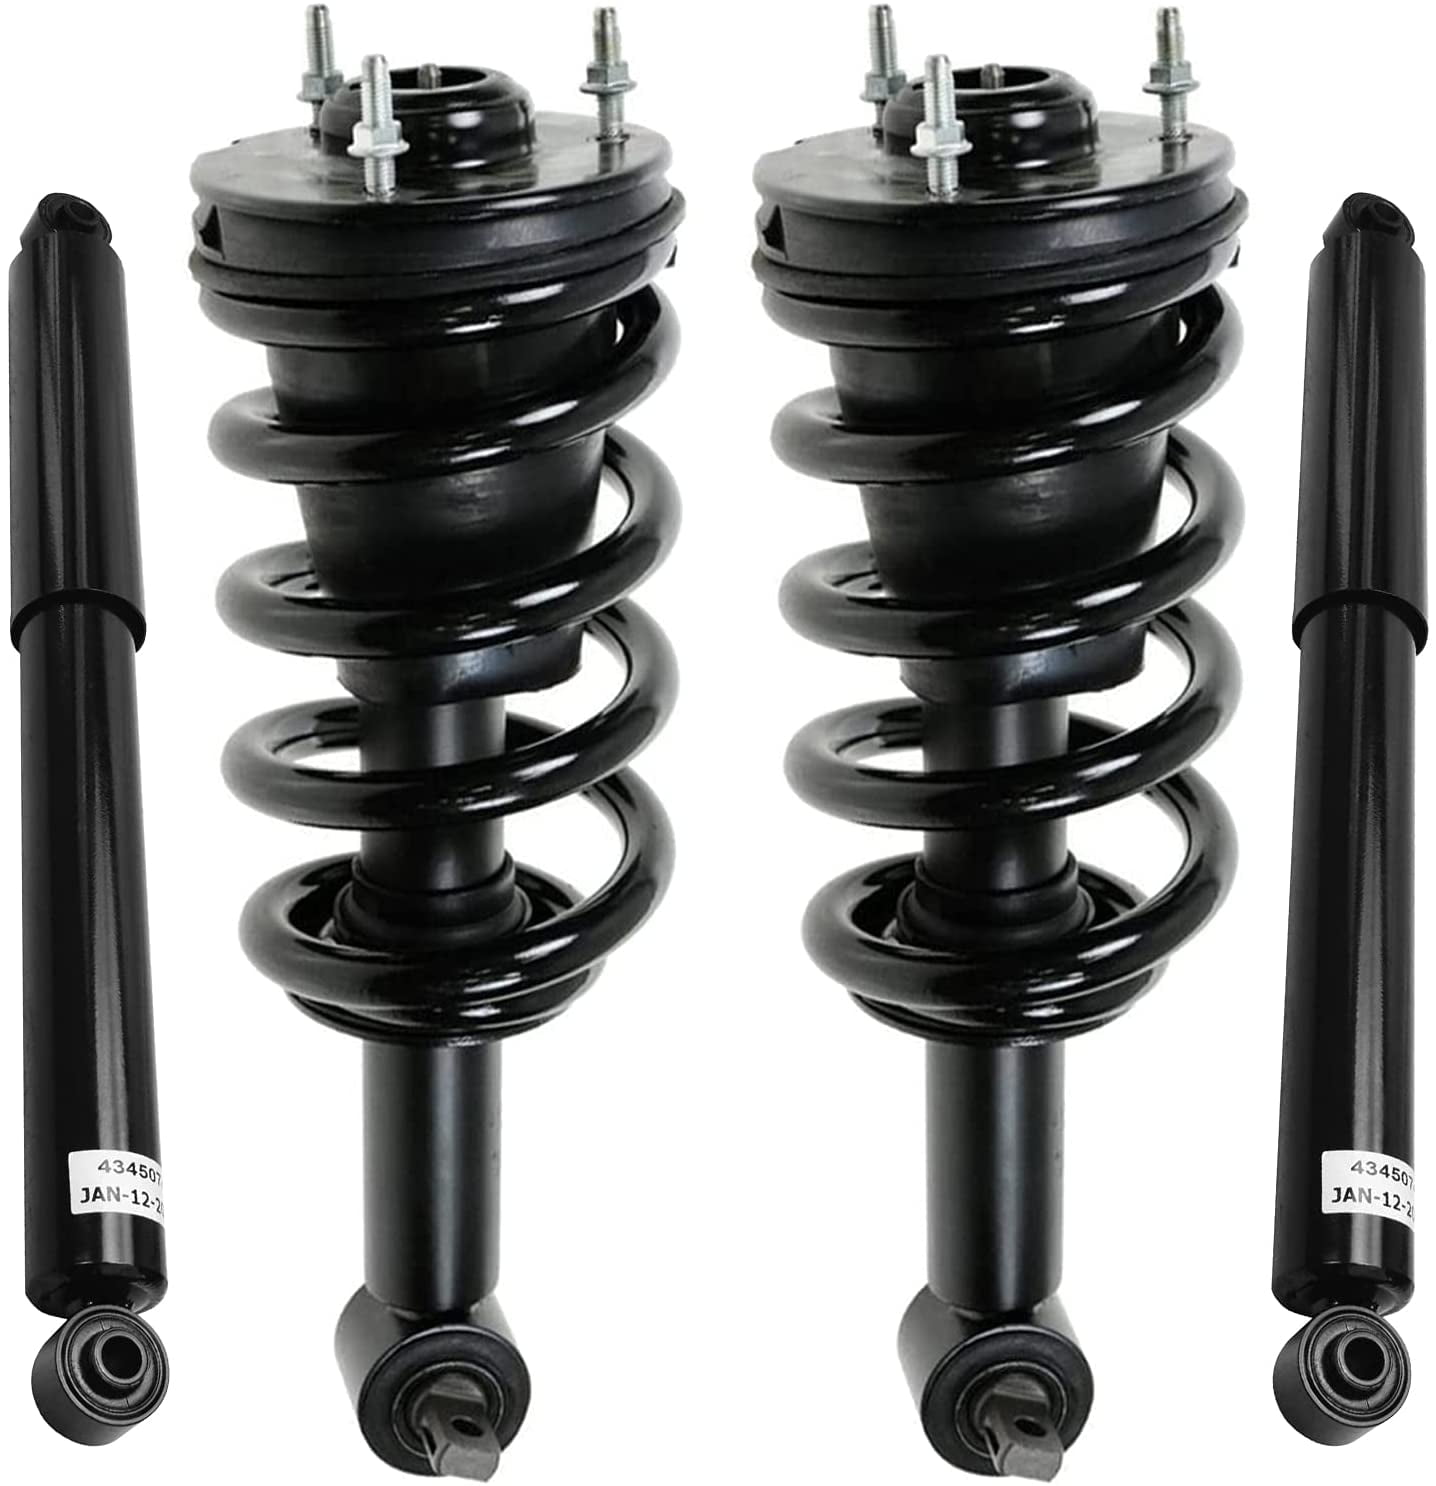 Monro-Matic Plus Shock Absorber Front Pair Set for Cadillac Chevy GMC Pickup SUV 